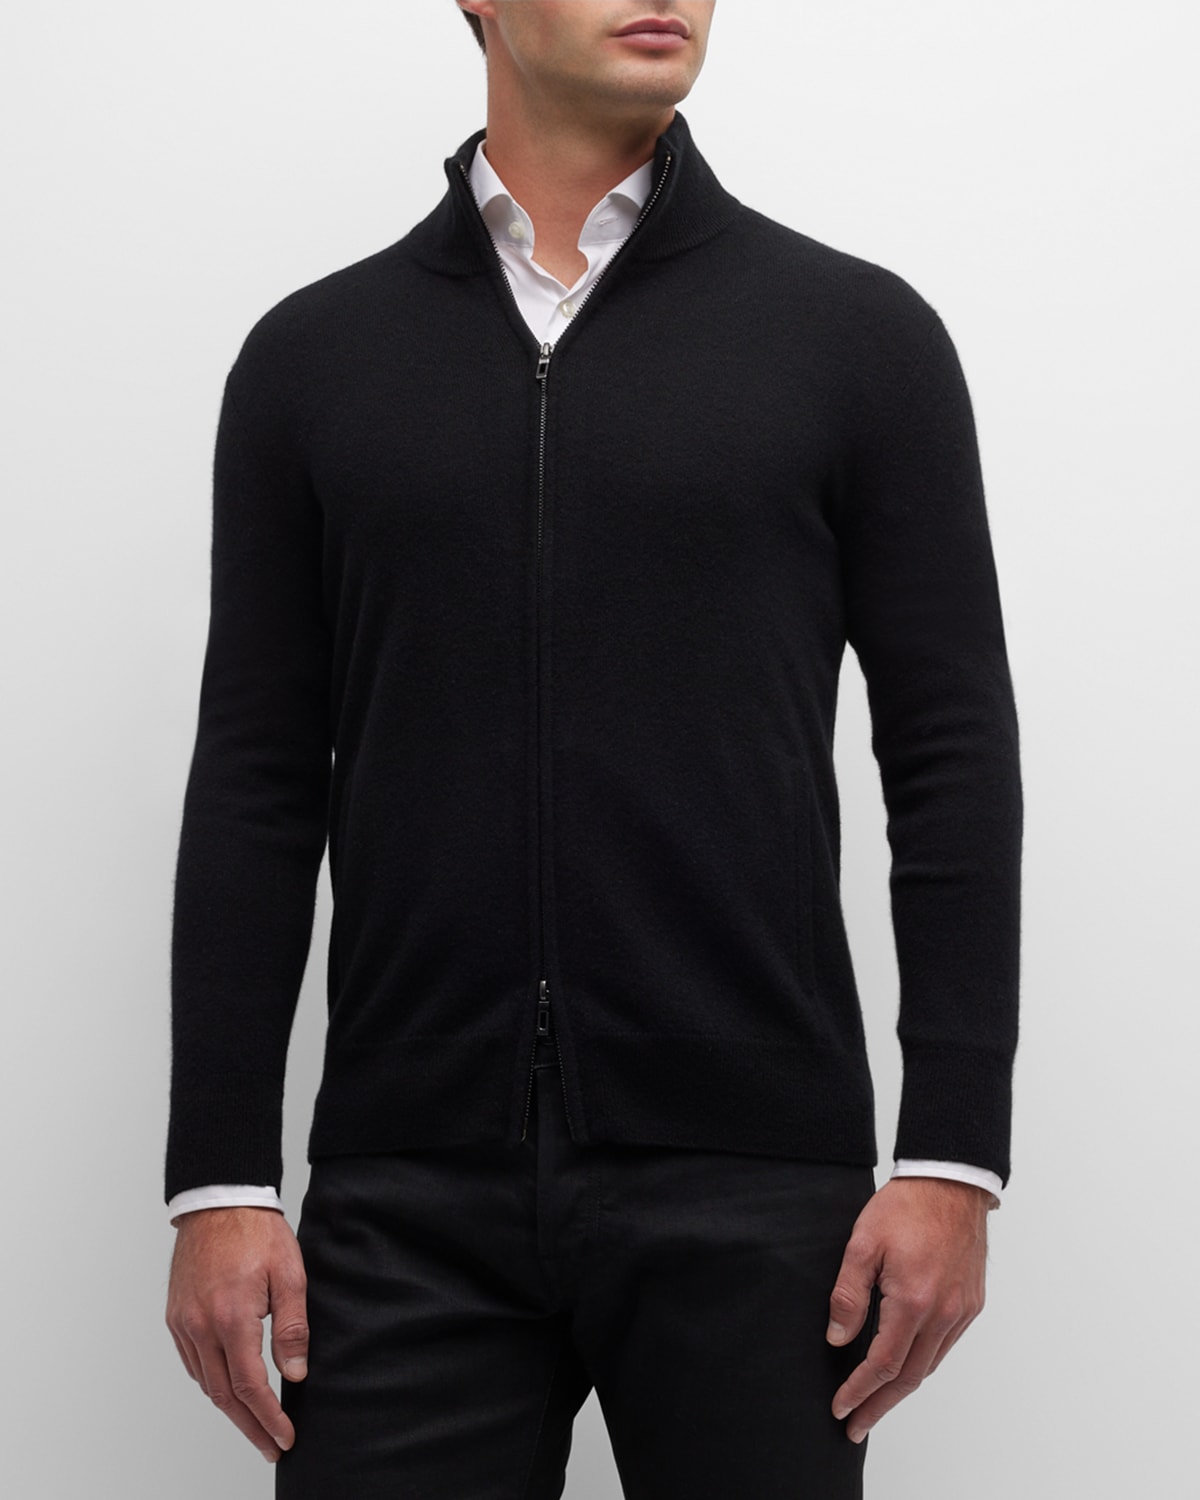 Men's Recycled Cashmere Full-Zip Sweater